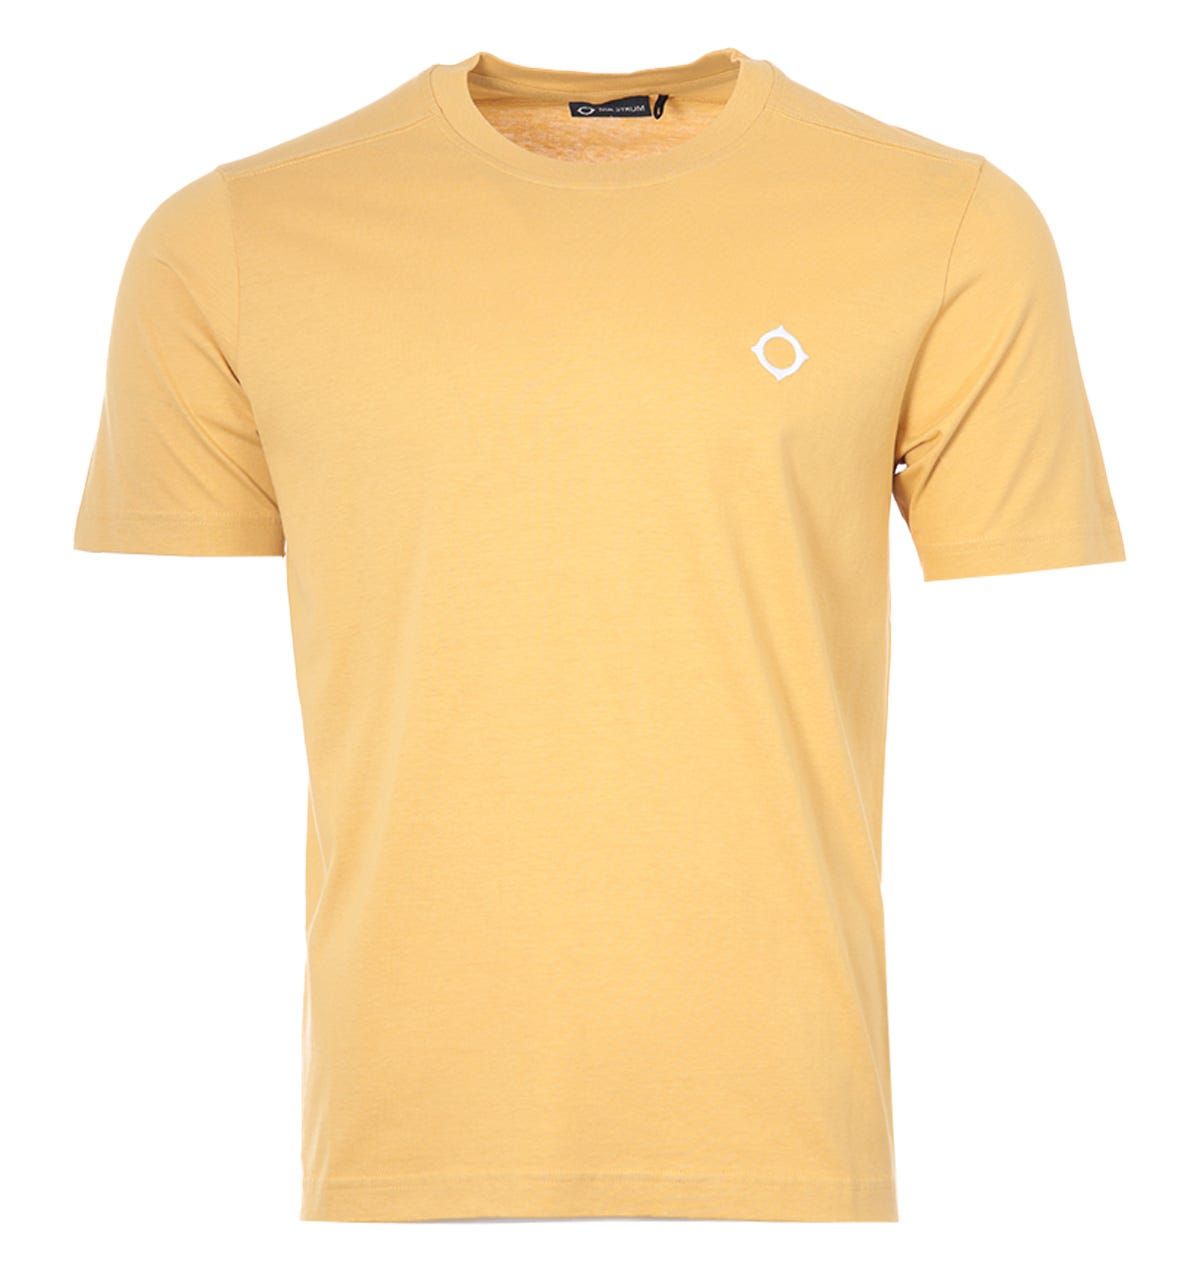 Elevate your wardrobe essentials with MA.Strum and their Icon t-shirt. Crafted from pure cotton, offering a super soft and lightweight feel. Featuring a classic crew neck design with a ribbed collar, short sleeves and their signature cross-back detailing. Finished with the iconic MA. Strum logo embroidered on the chest. Pure Cotton Composition, Ribbed Crew Neck, Short Sleeves, Signature Cross-Back Detailing, Straight Hemline, Tonal Stitching , MA.Strum Branding. Fit & Style: Regular Fit, Fits True to Size. Composition & Care: 100% Cotton , Machine Wash.